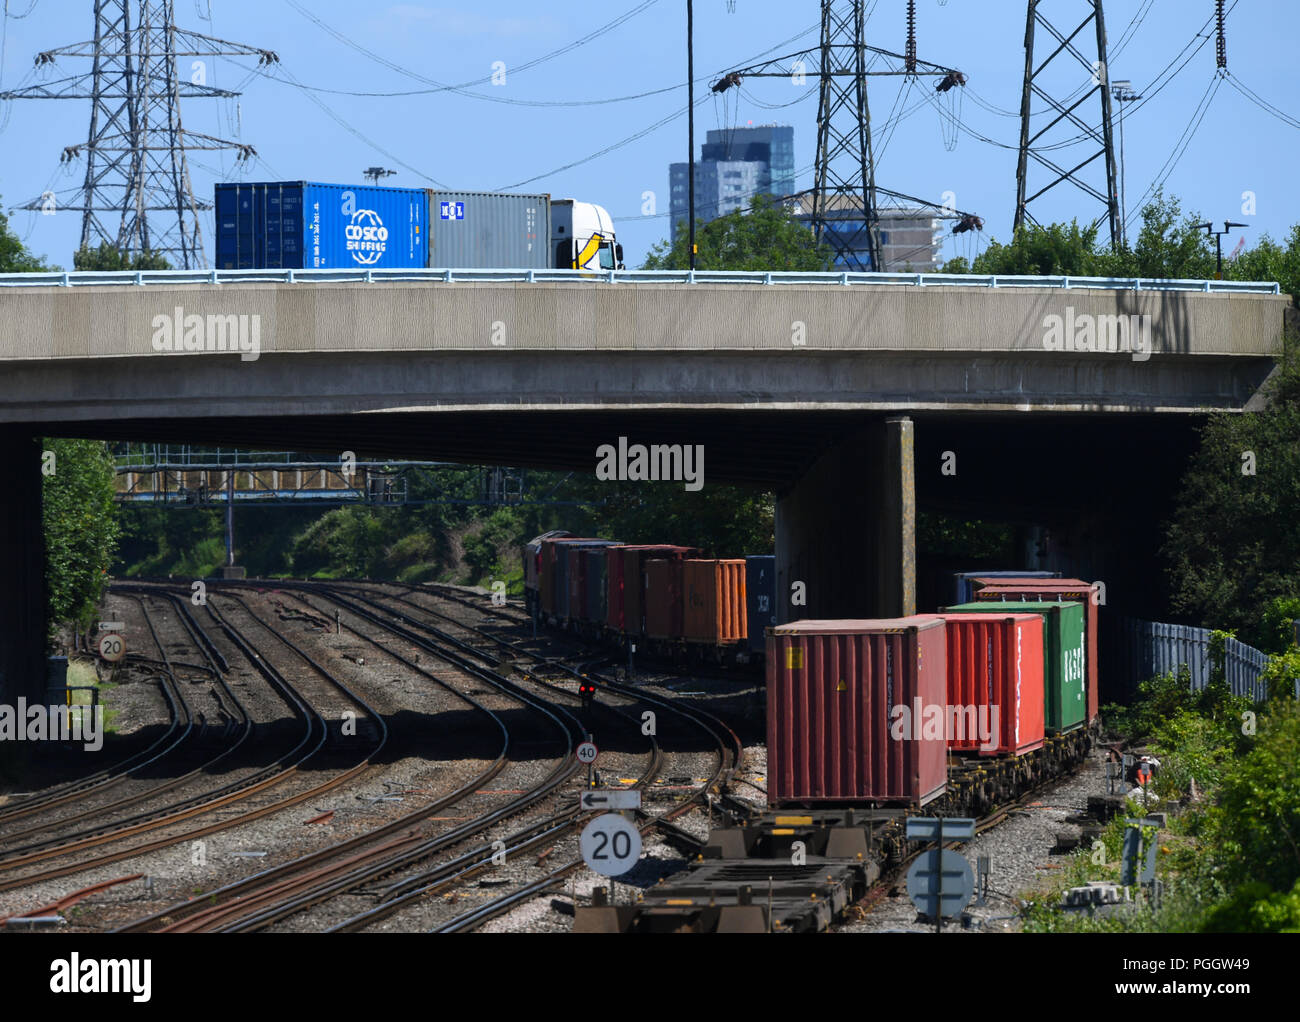 Road versus rail, a truck carrying containers passes above a container train below. Stock Photo